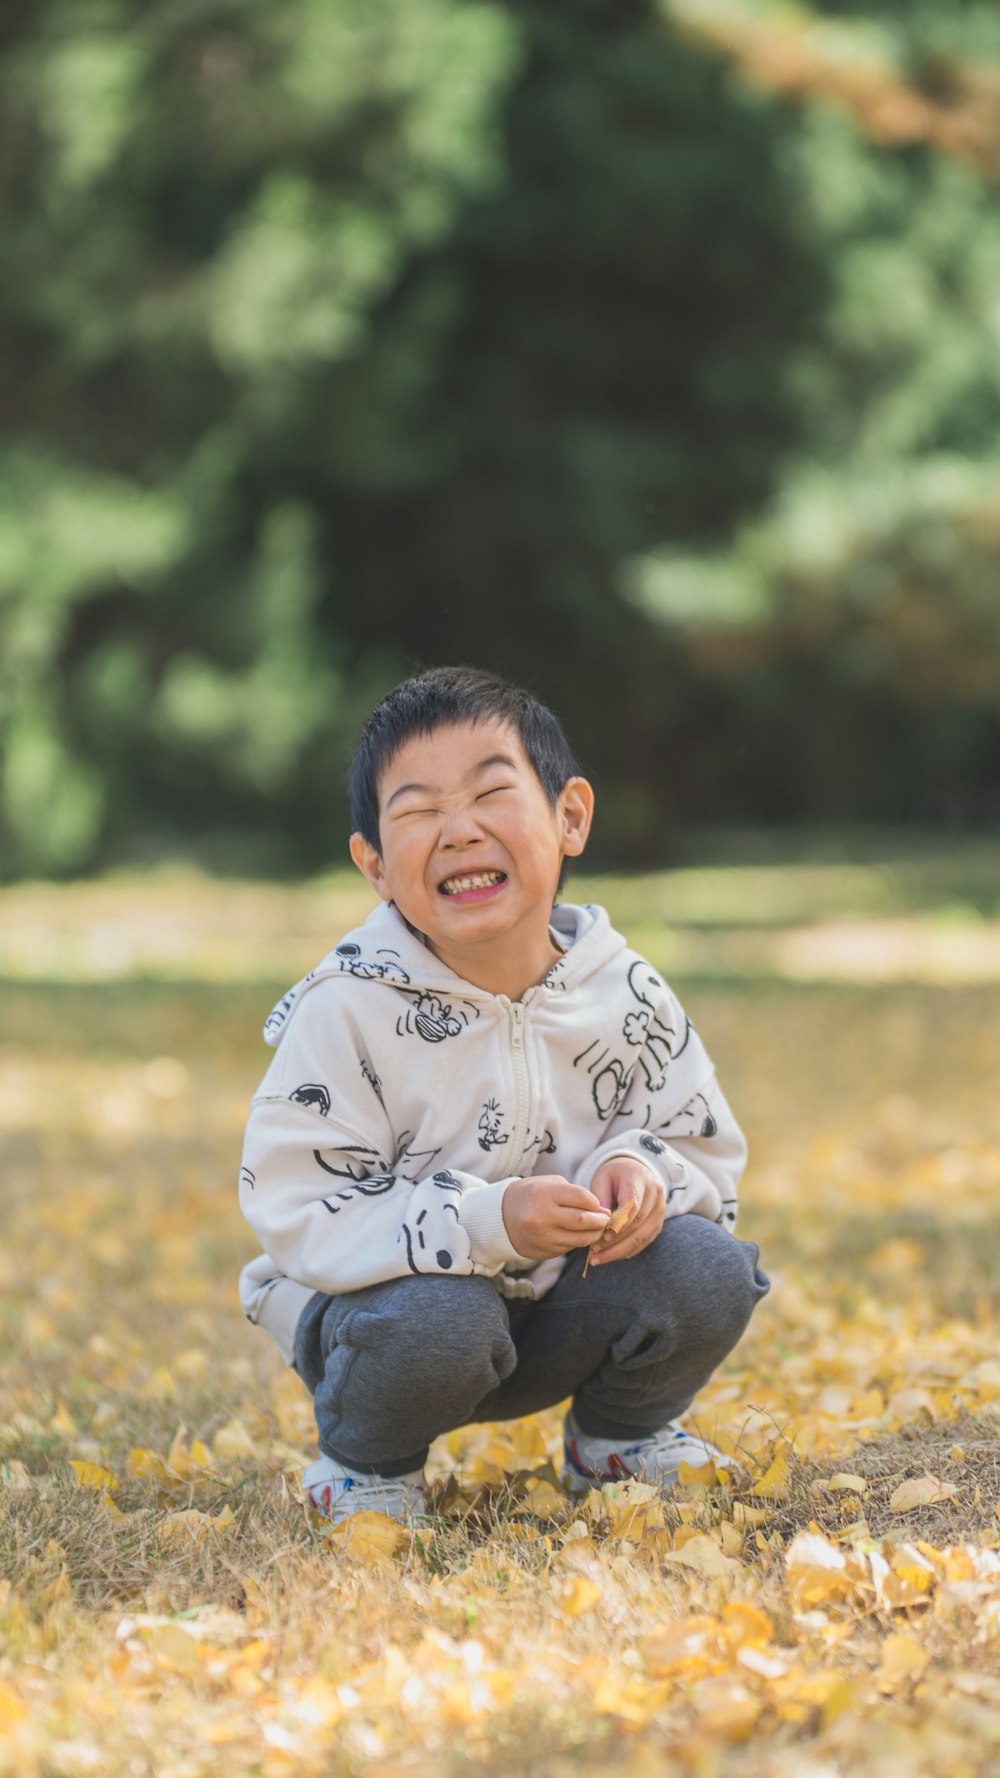 a young boy sitting on the ground laughing